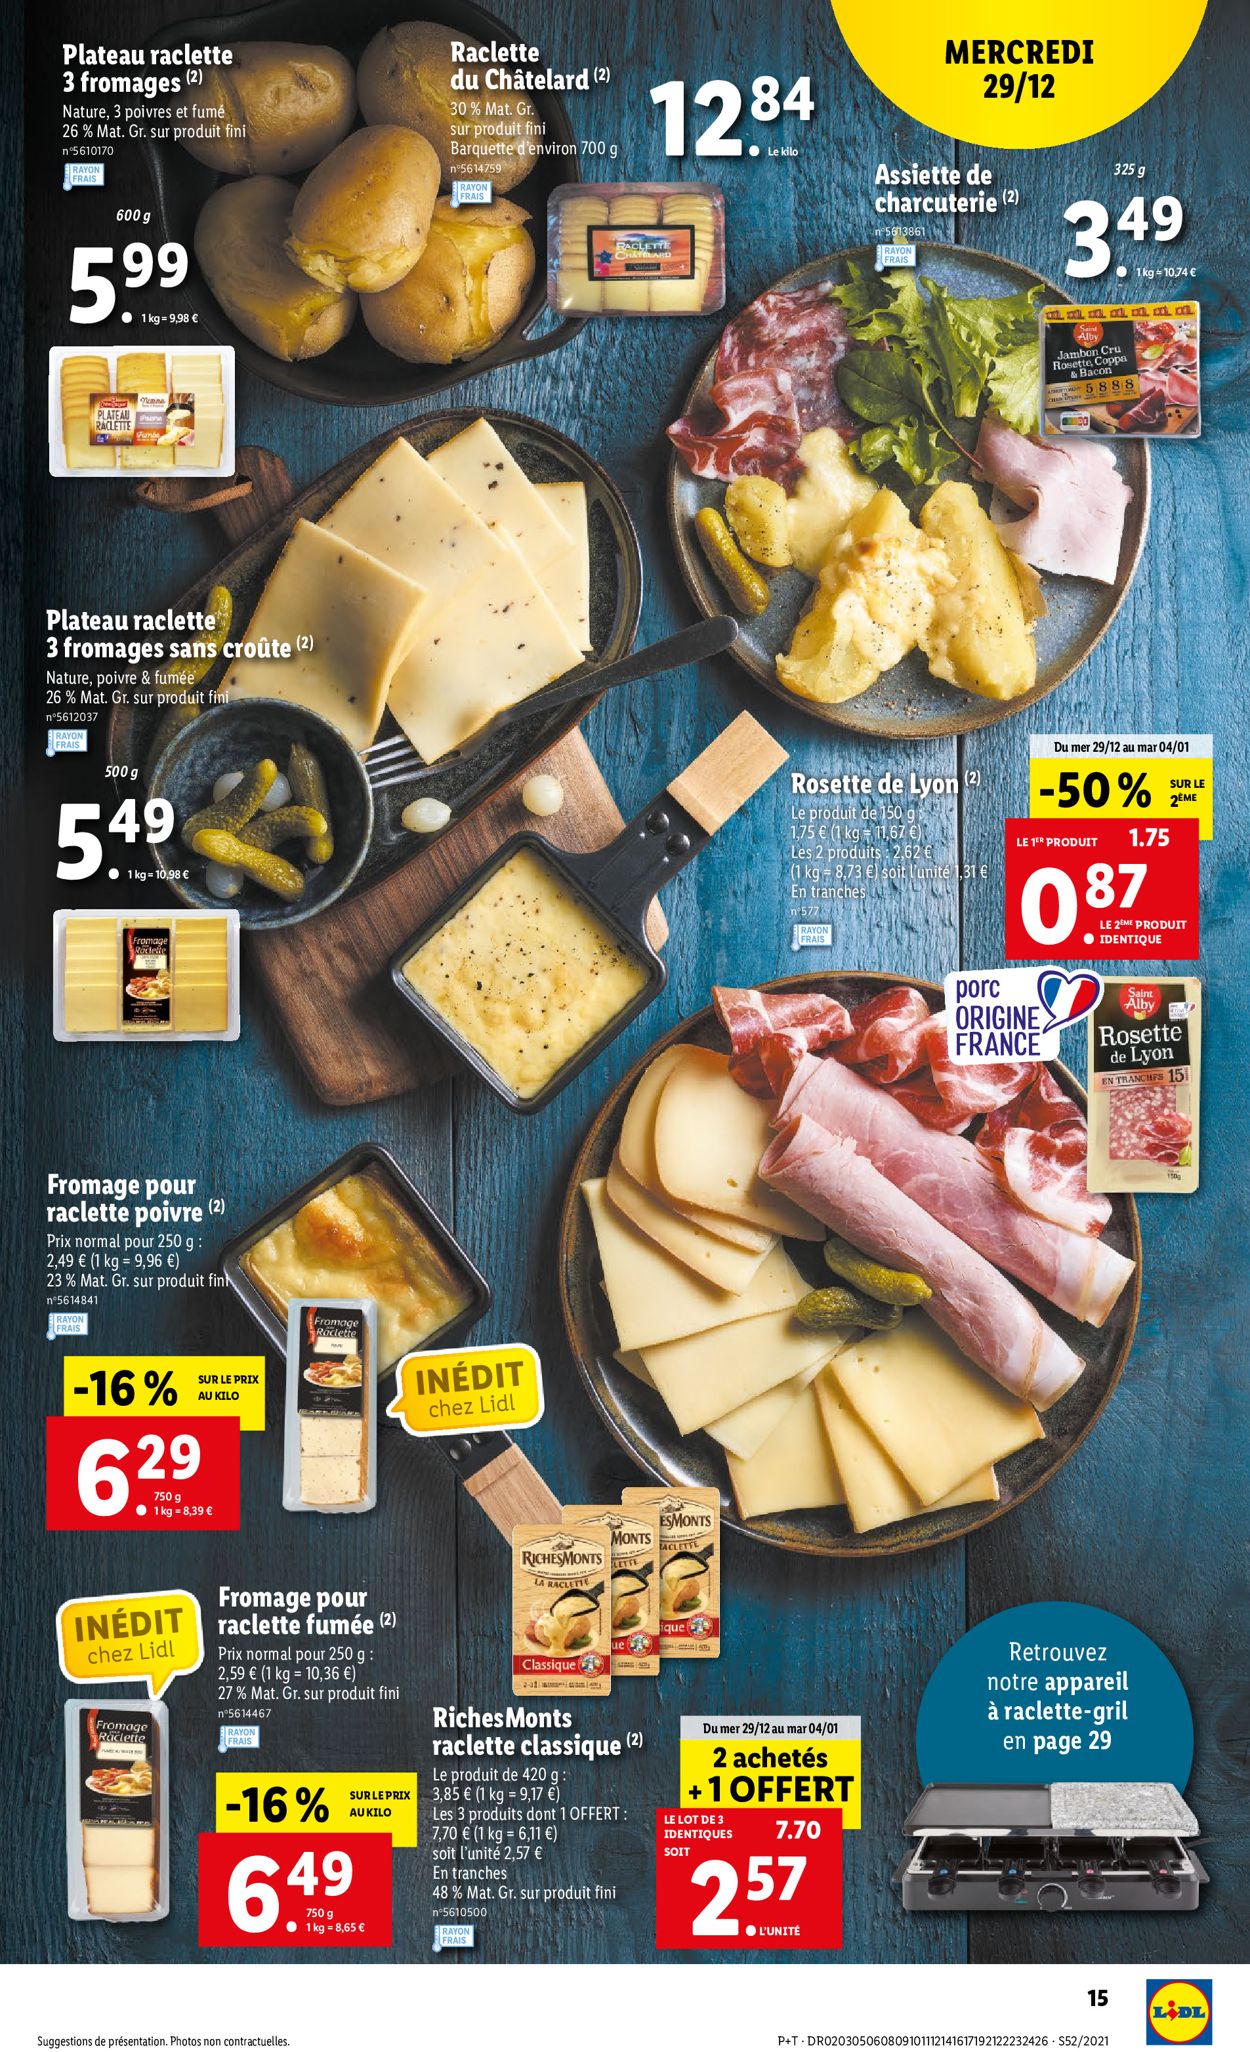 Lidl Catalogue - 29.12-04.01.2022 (Page 15)